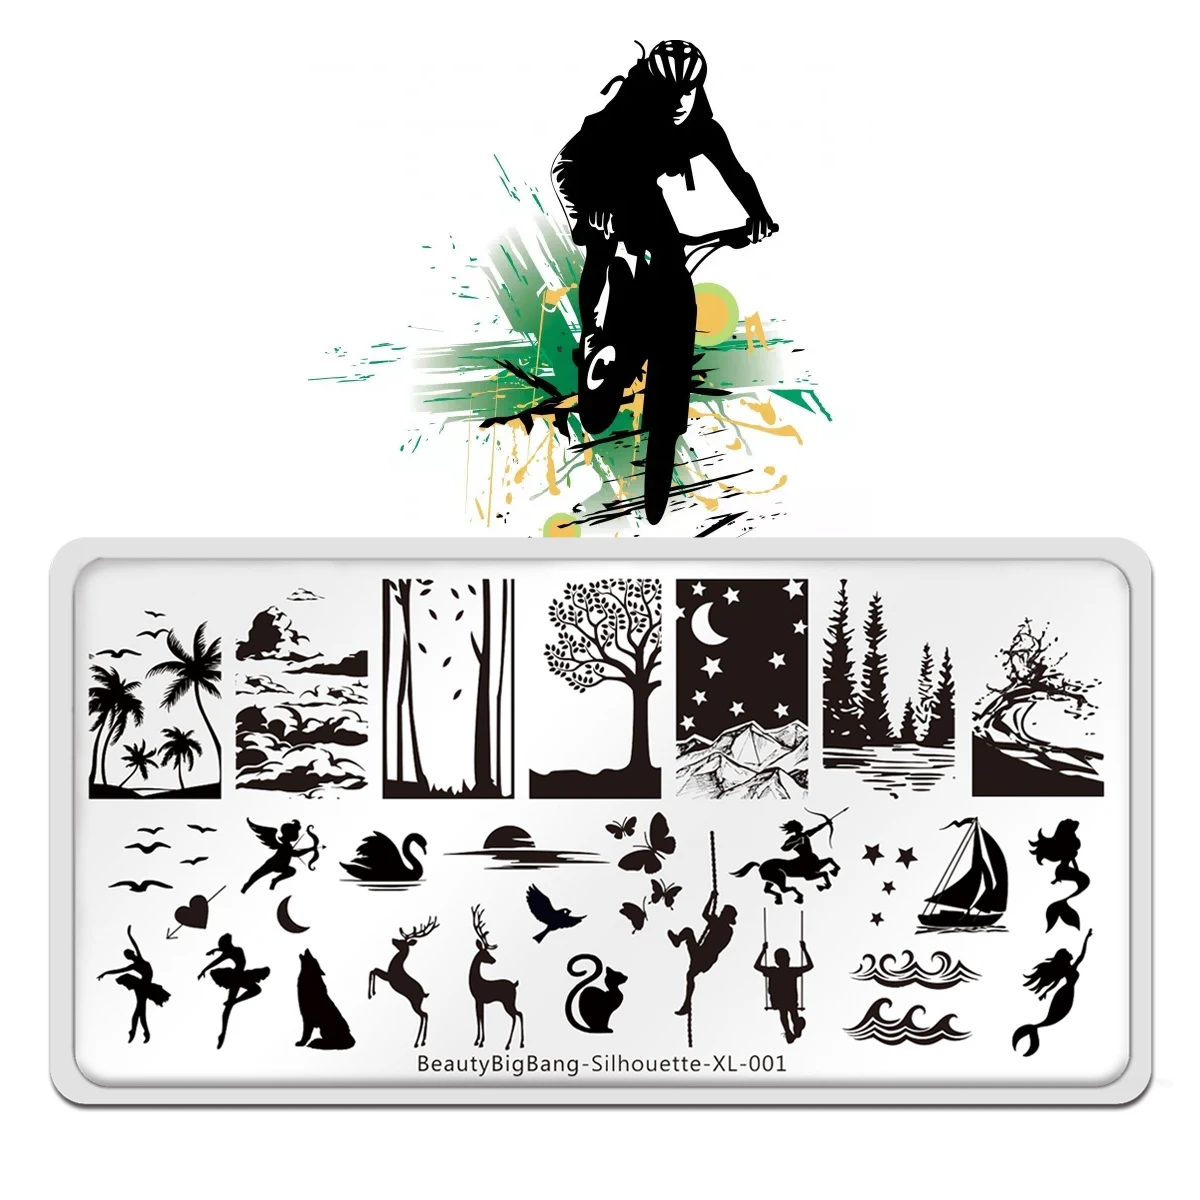 Beauty Big Bang New Silhouette XL-001 Stamping Plates Animal Tree Scenery Wolf Image Stainless Steel Stencil Nail Art Template